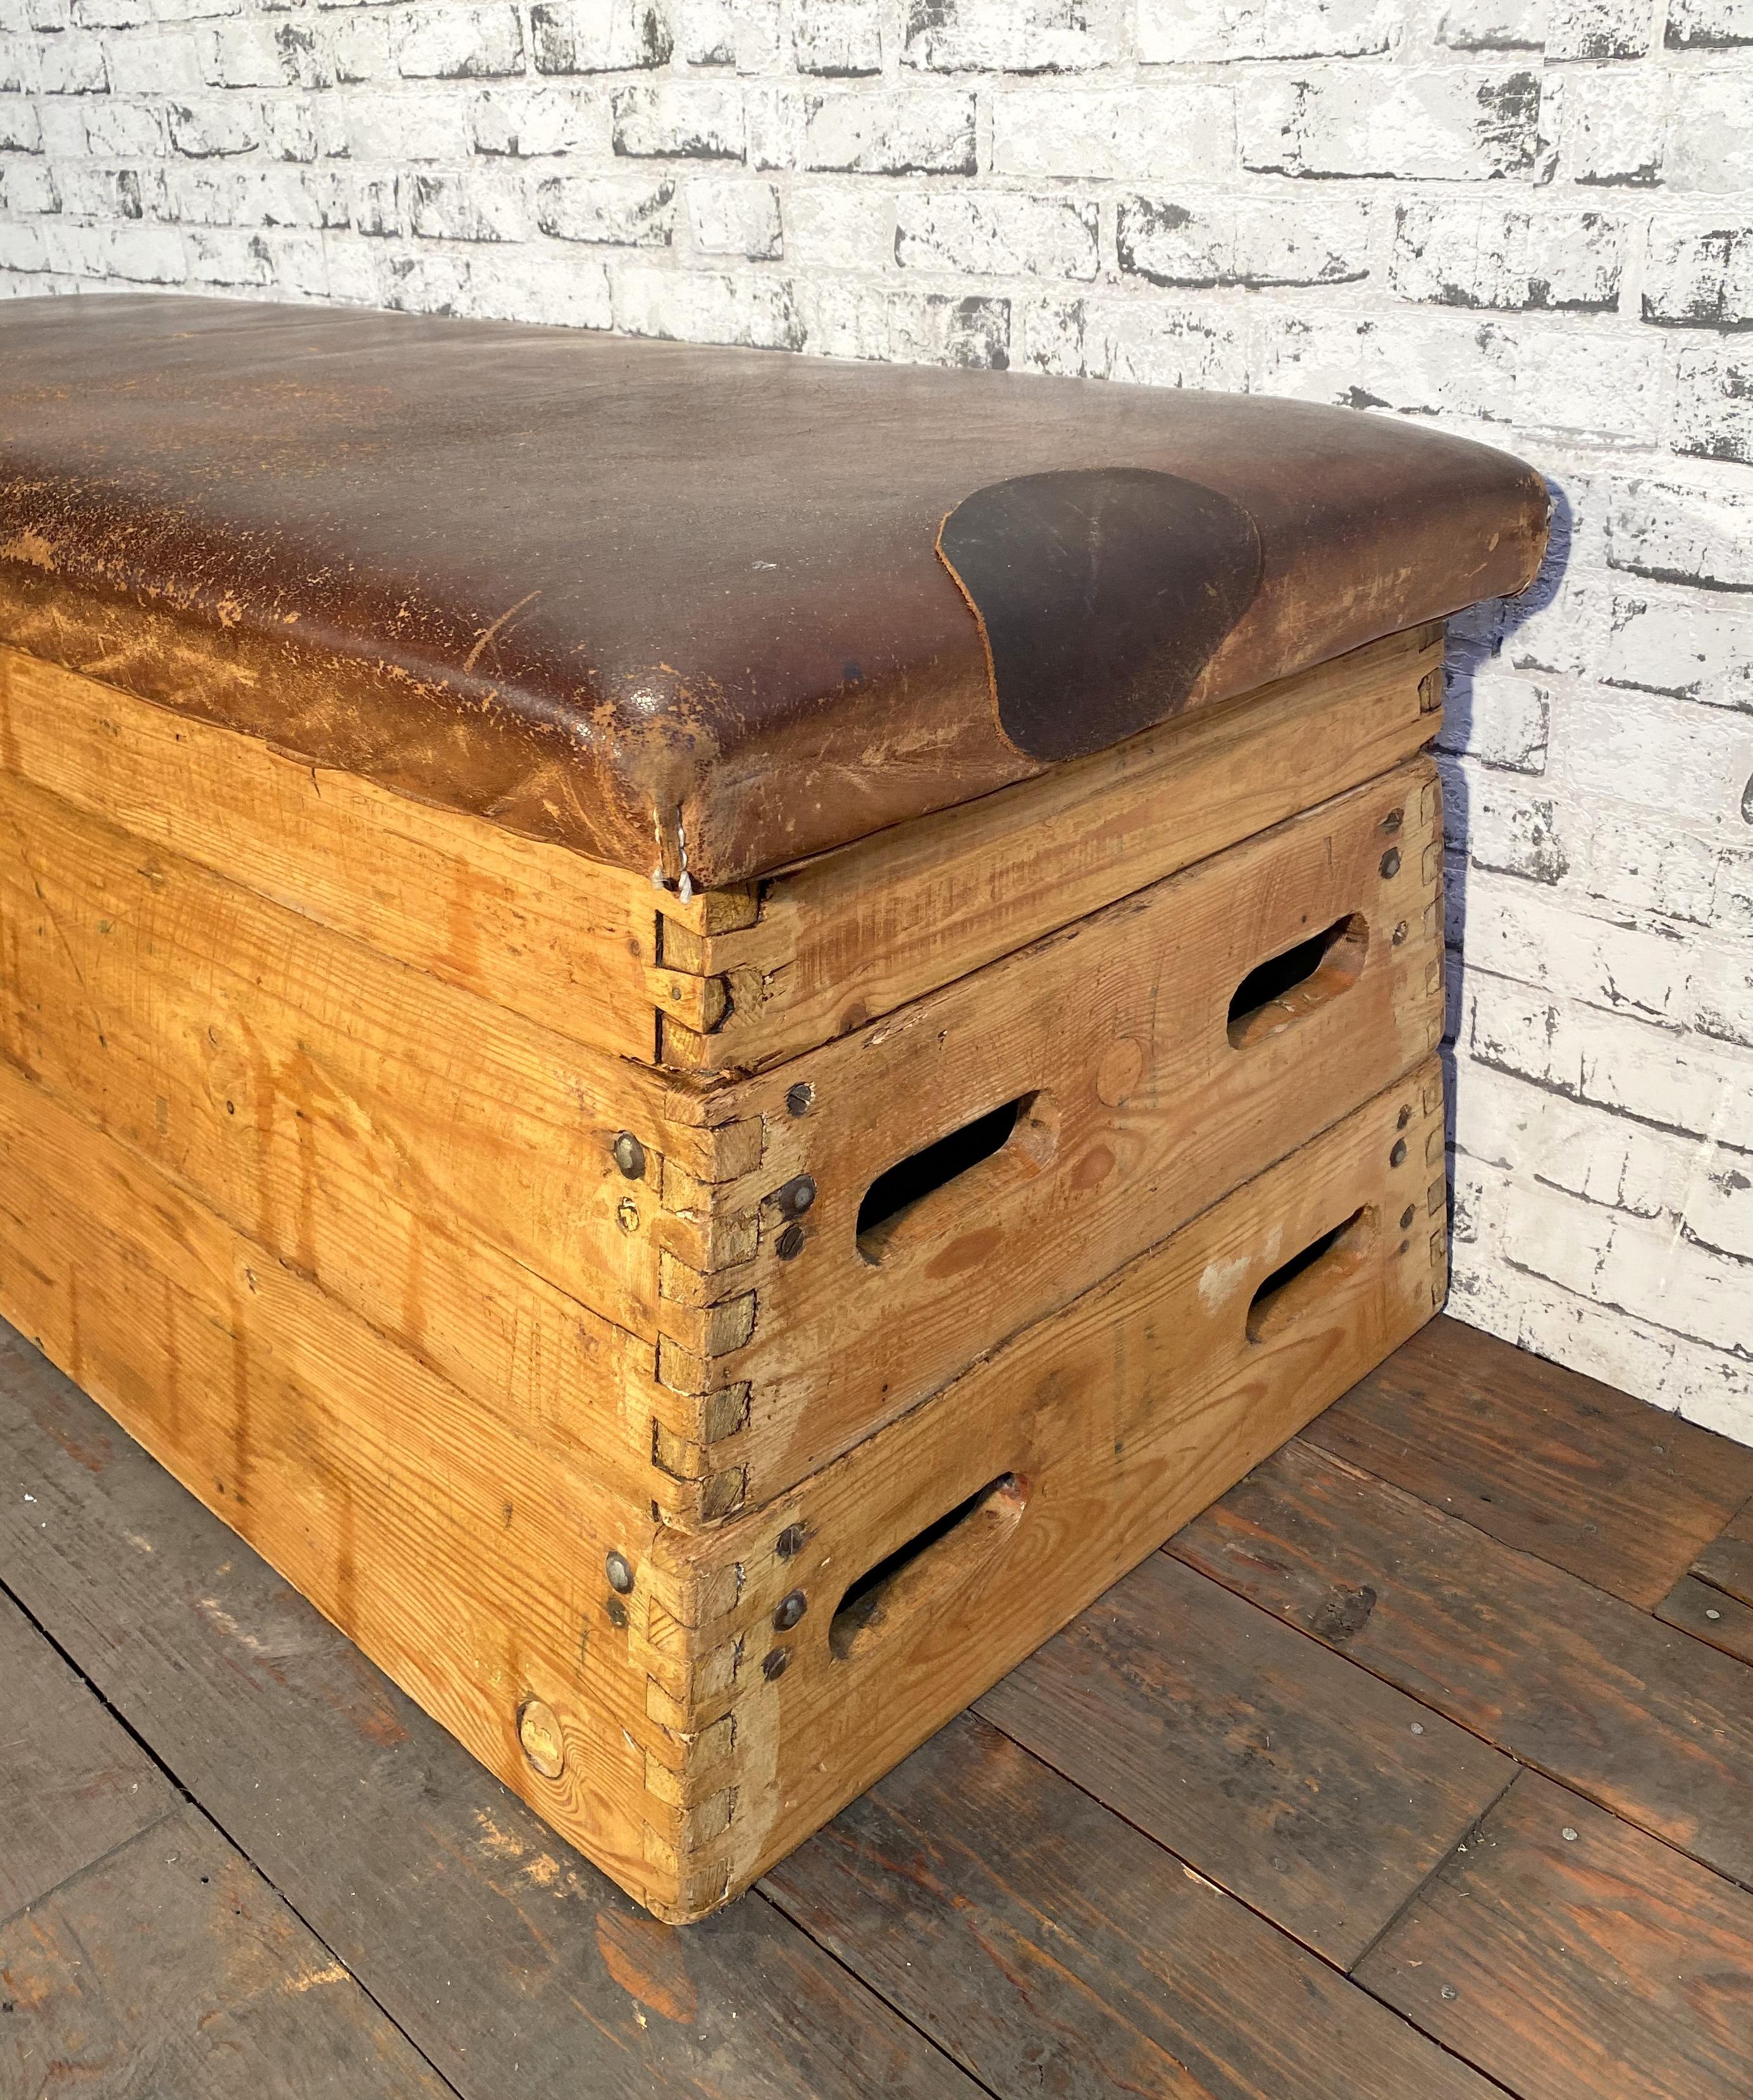 This is a leather gym bench from the 1950s. It features a wooden body and the top from thick leather.